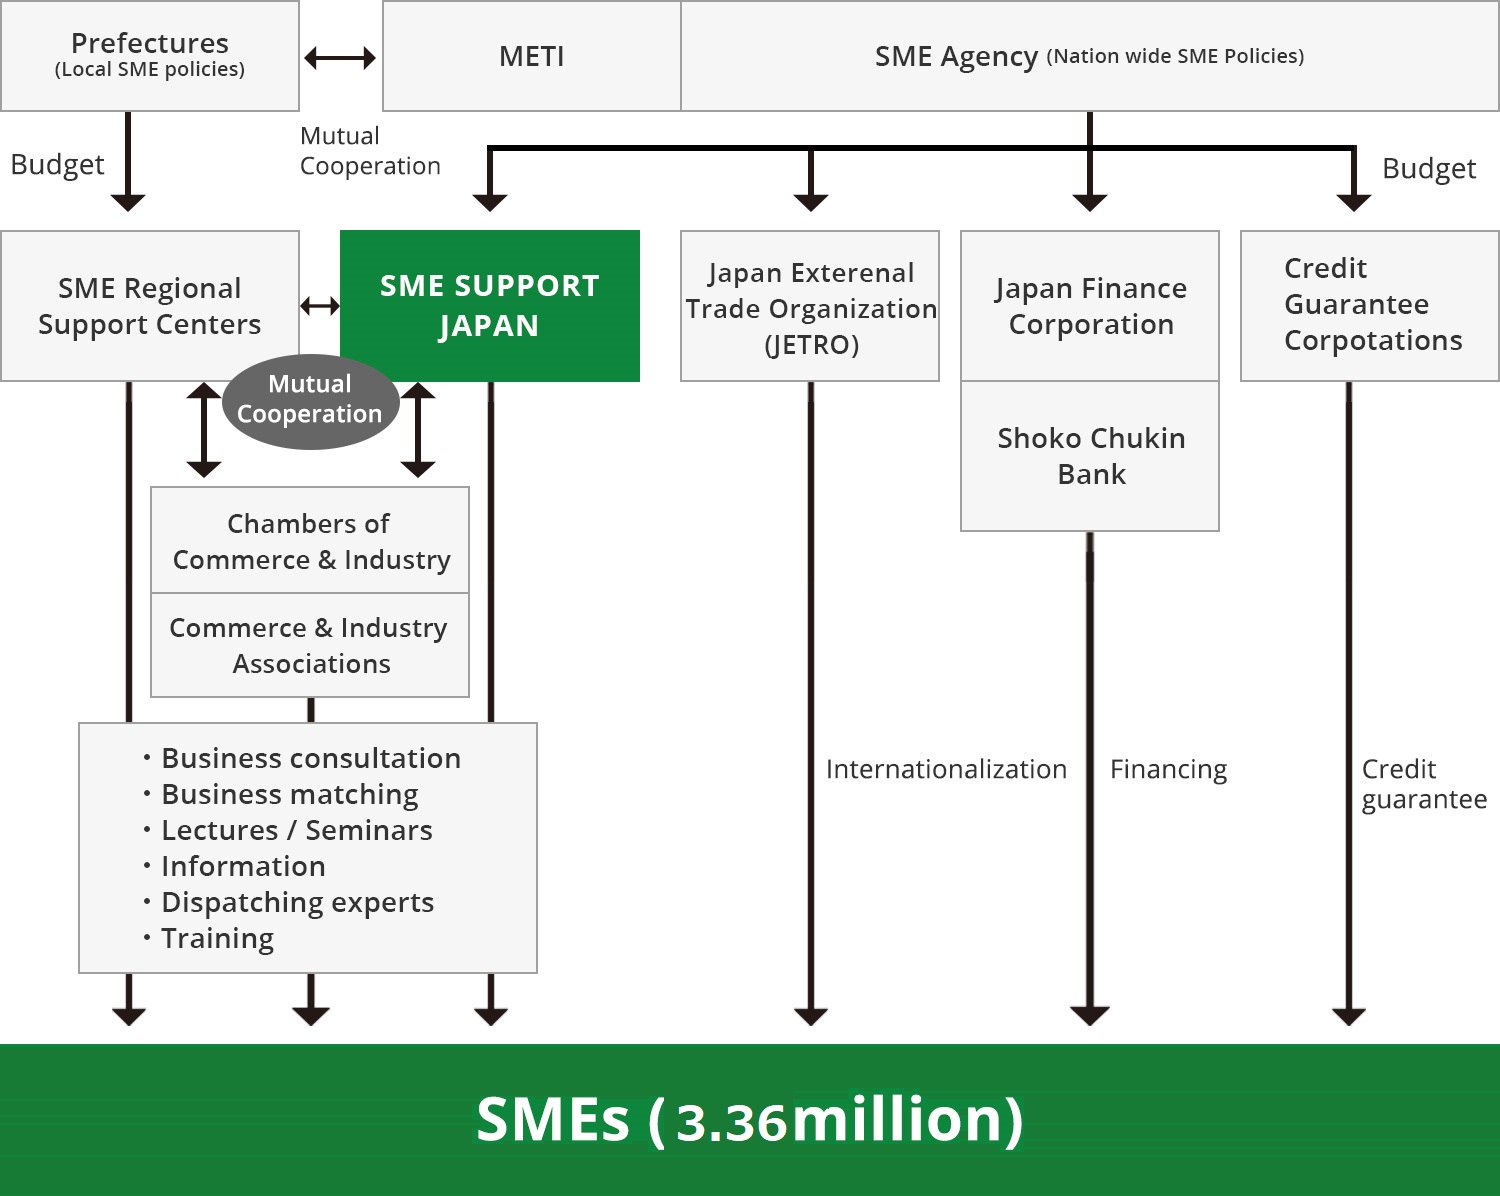 How SME policies are implemented in Japan